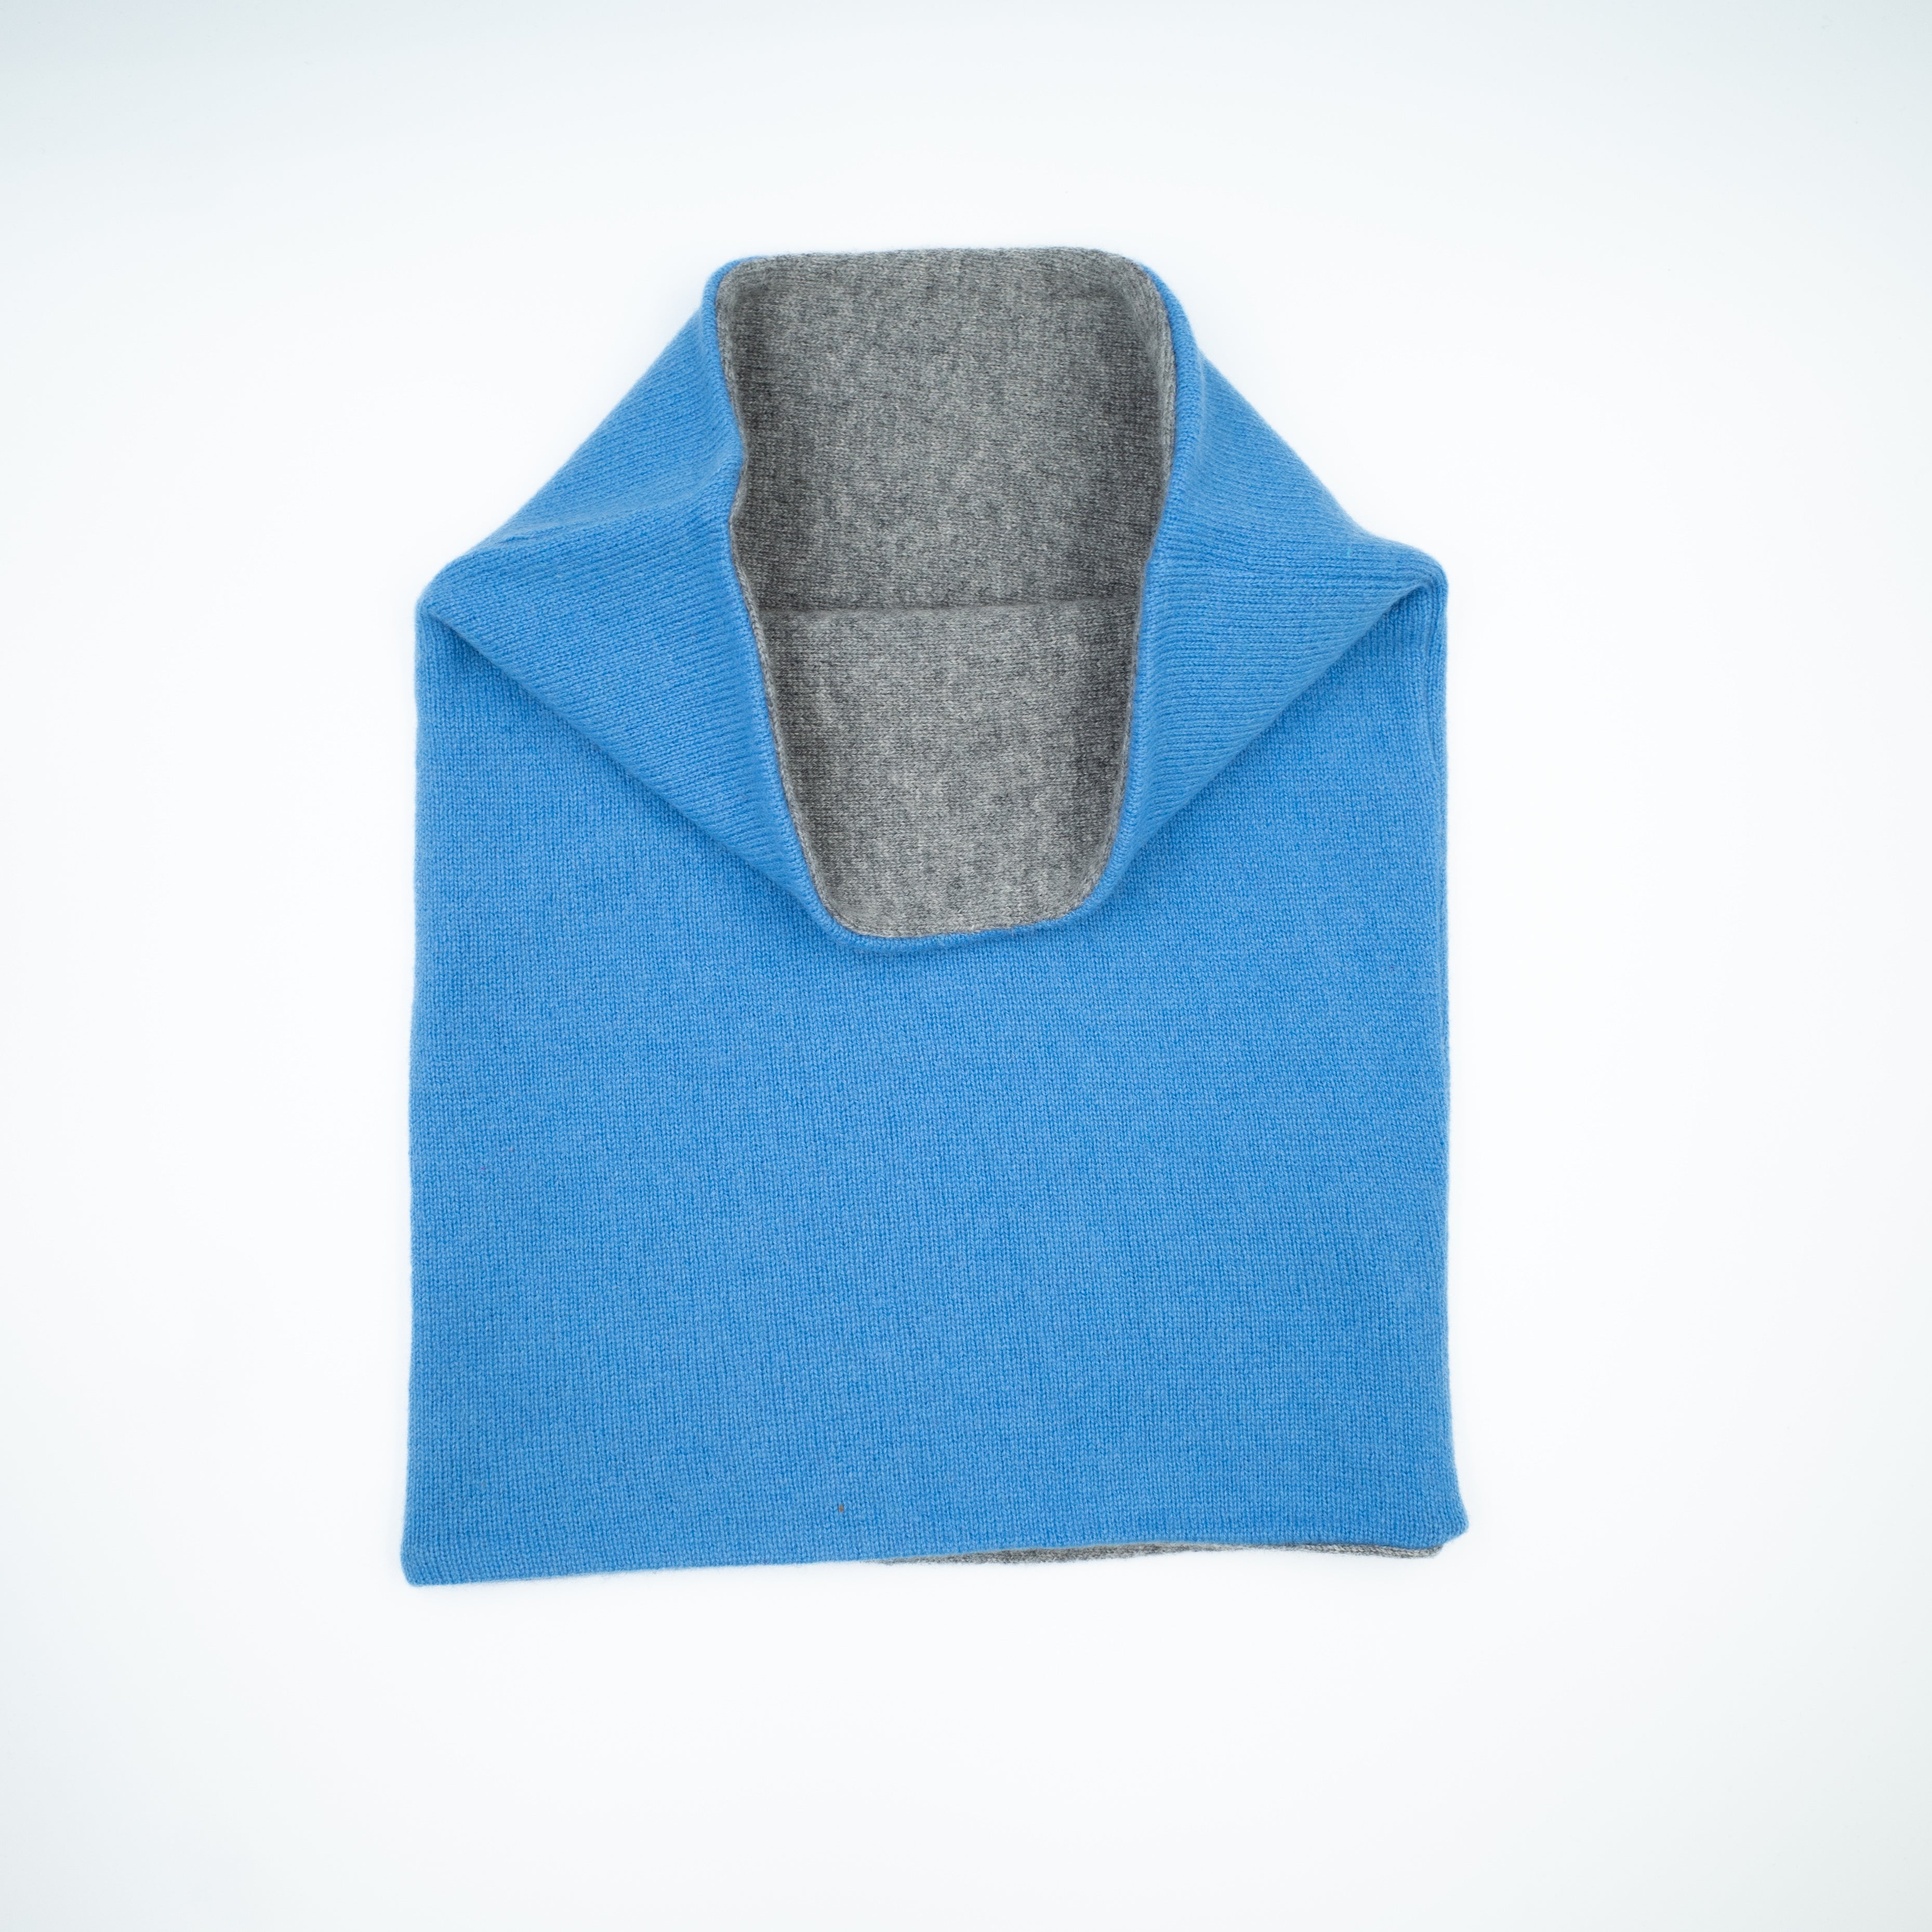 Cornflower Blue and Ash Grey Double Layered Snood